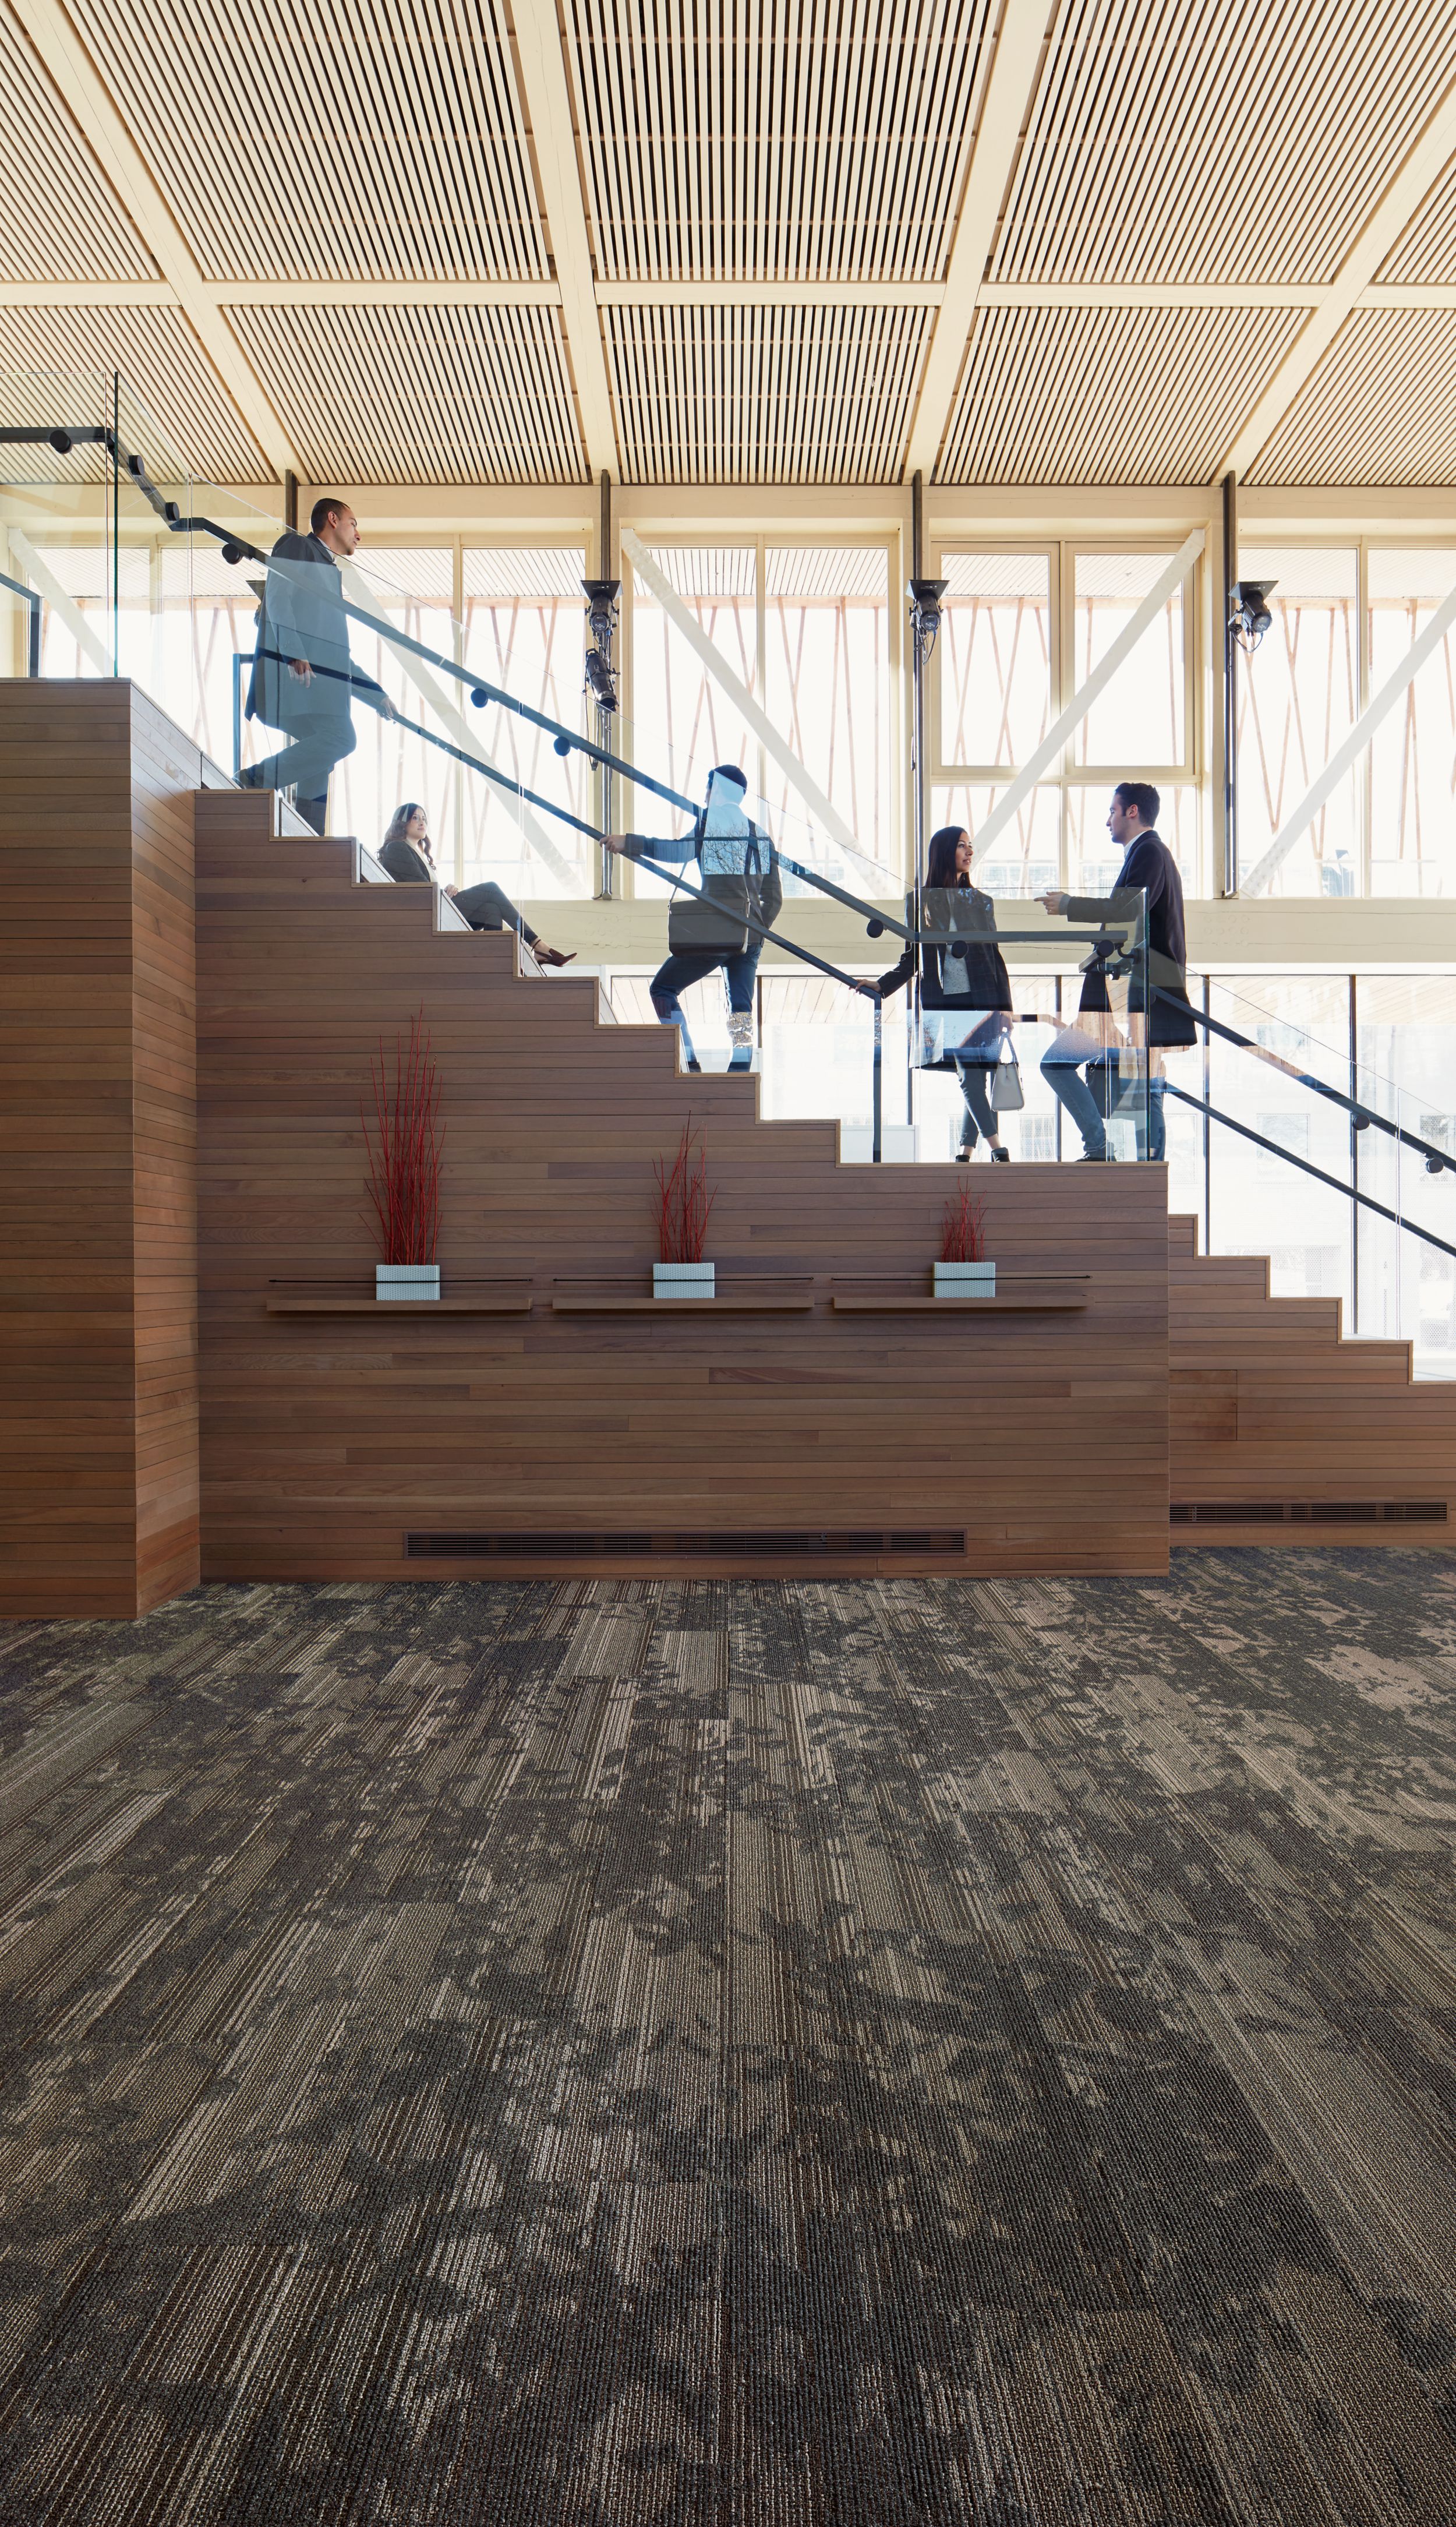 Interface Glazing plank carpet tile with wooden staircase in background imagen número 5